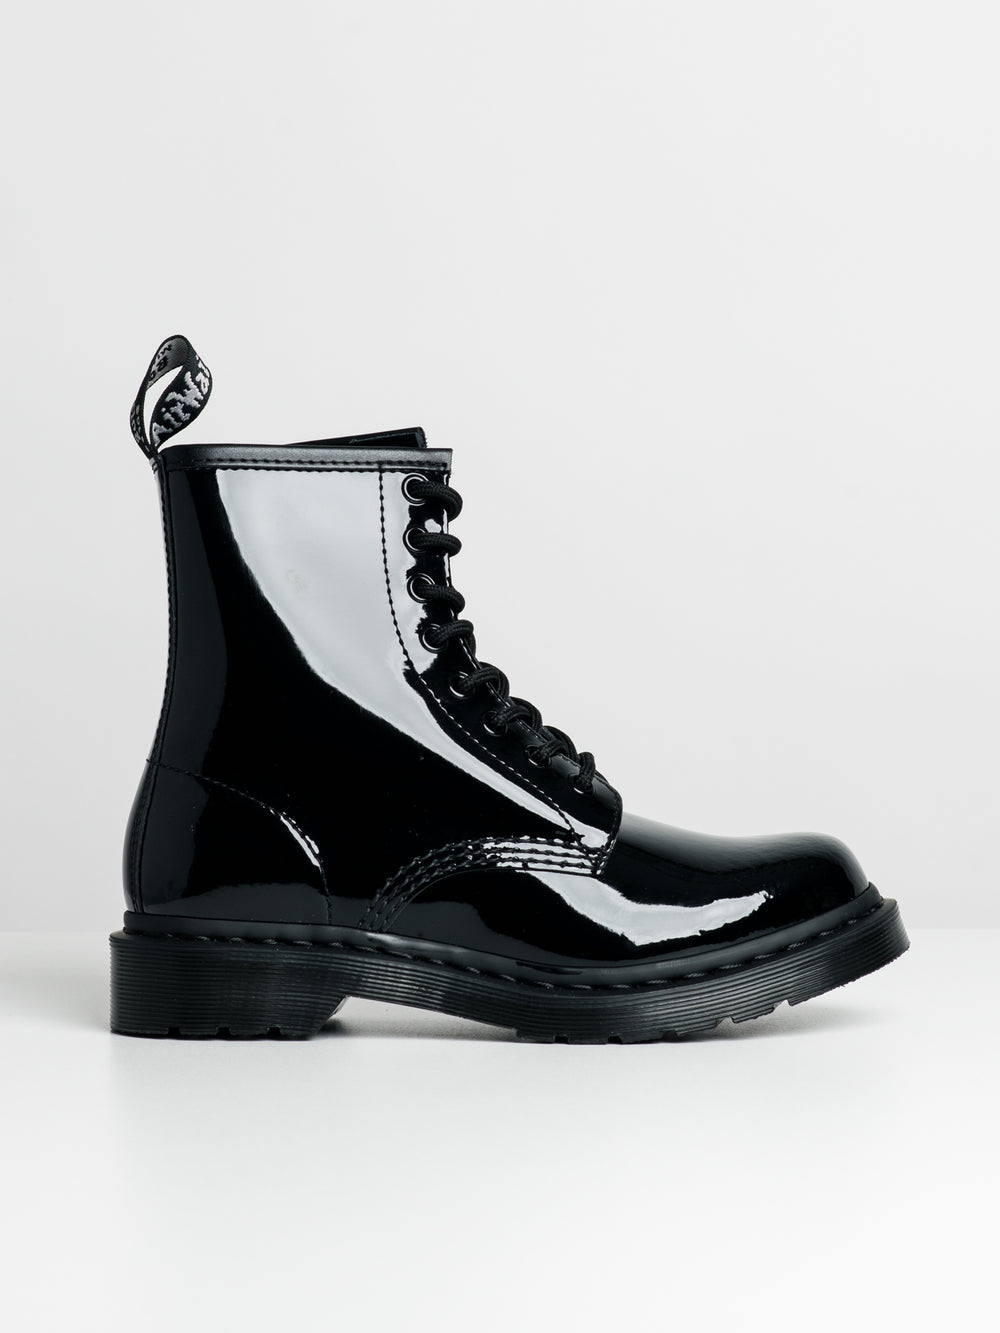 WOMENS DR MARTENS 1460 MONO PATENT LAMPER BOOT - CLEARANCE